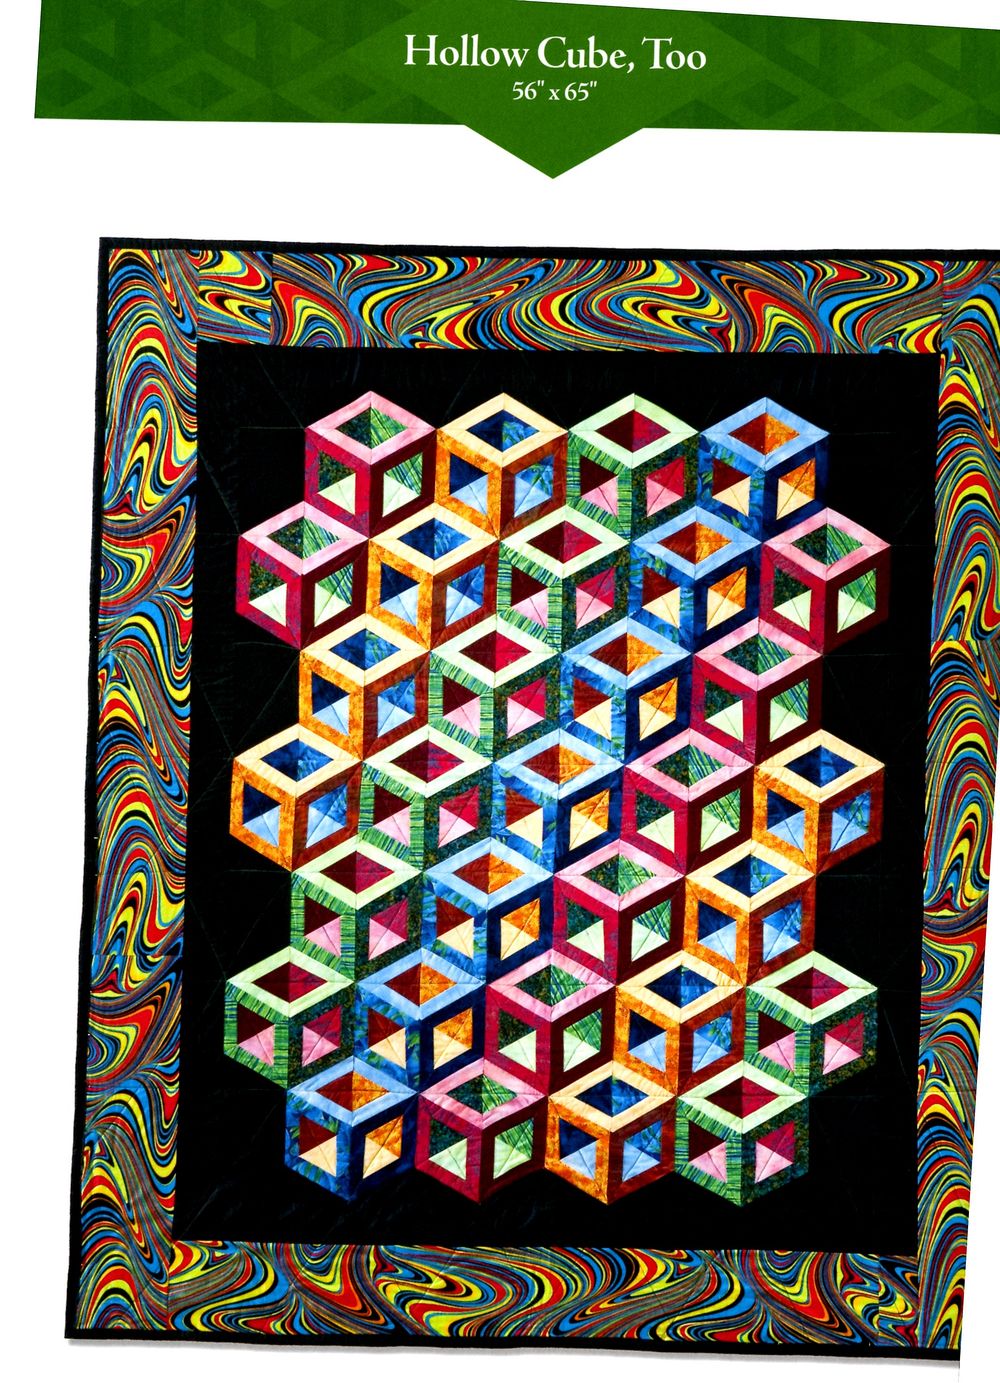 Abc 3-D Tumbling Blocks and More Quilt Pattern Book by Marci Baker for C&T Publishing